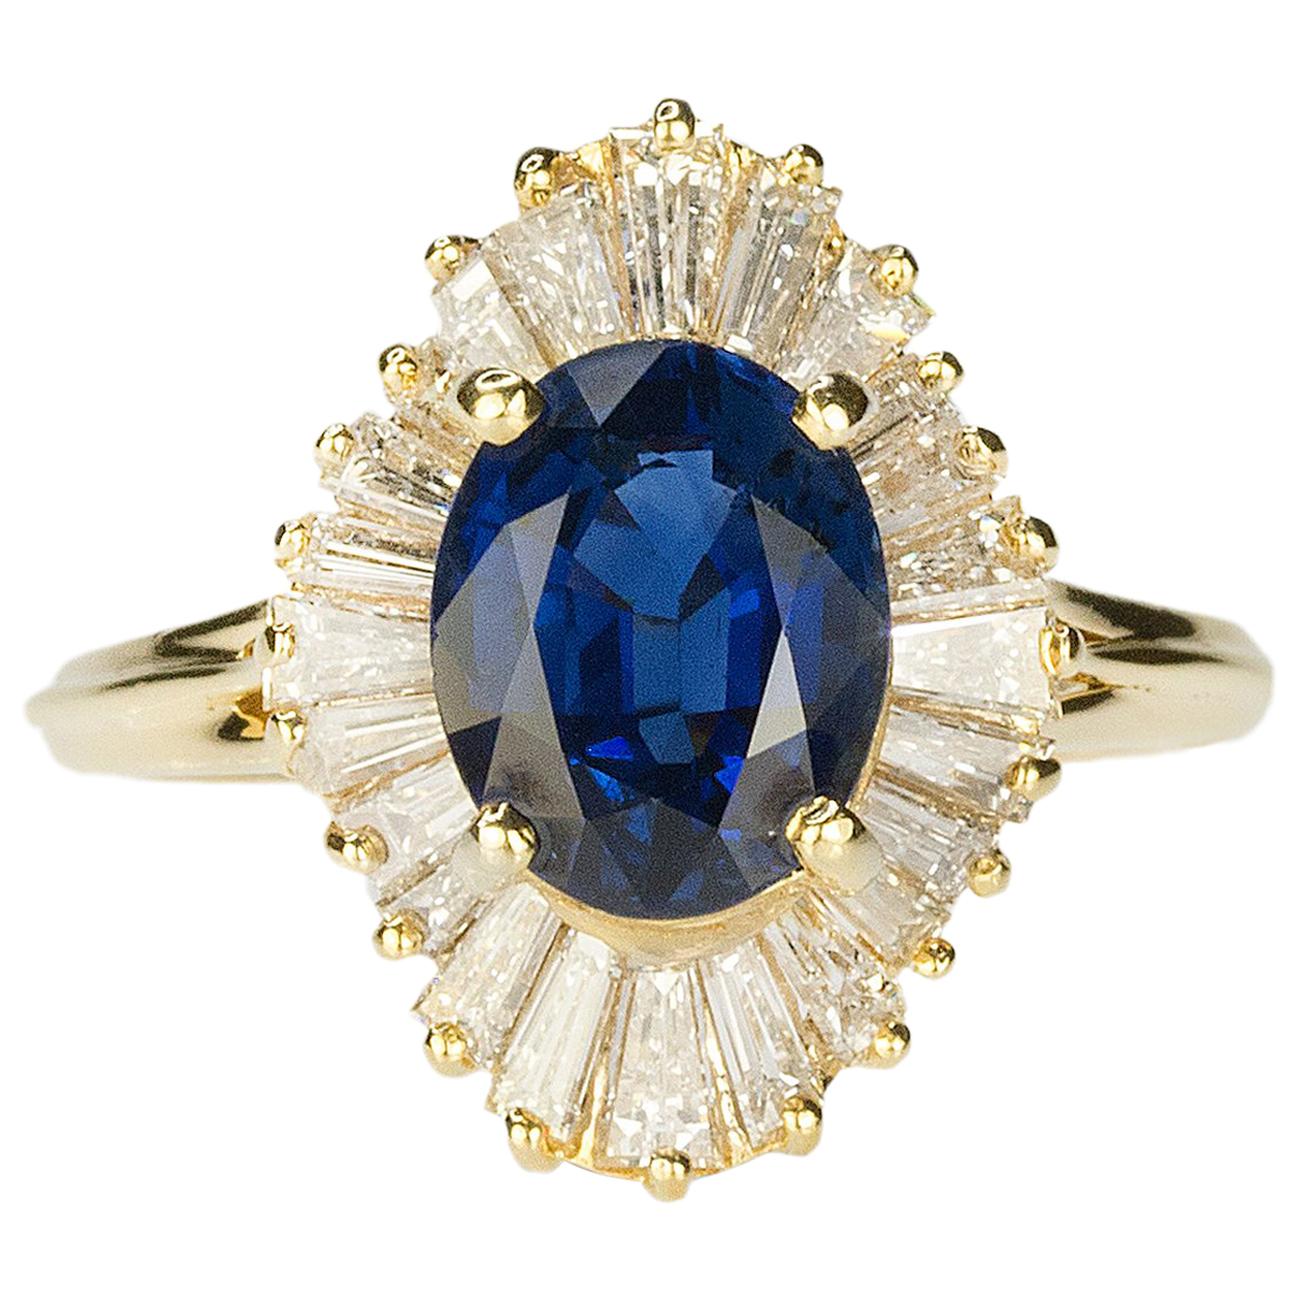 Gold Ballerina Ring with Royal Blue Sapphire